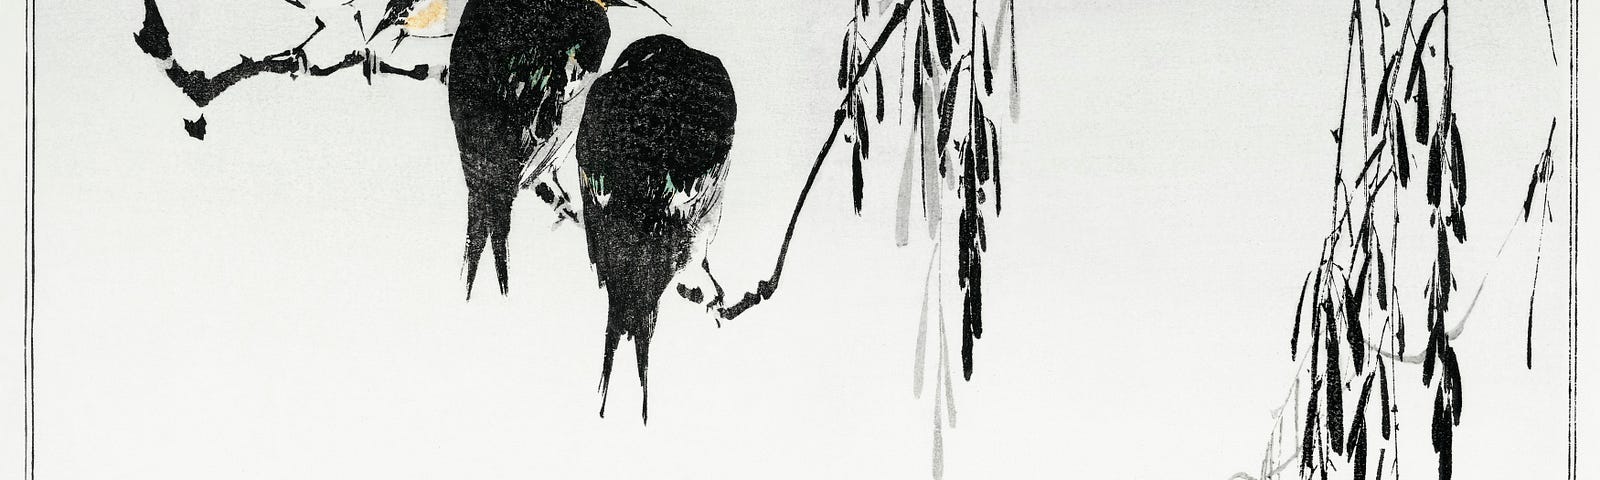 Delicate, traditional Japanese painting in black and white with flecks of creamy yellow.: magpies perched on willow branch.